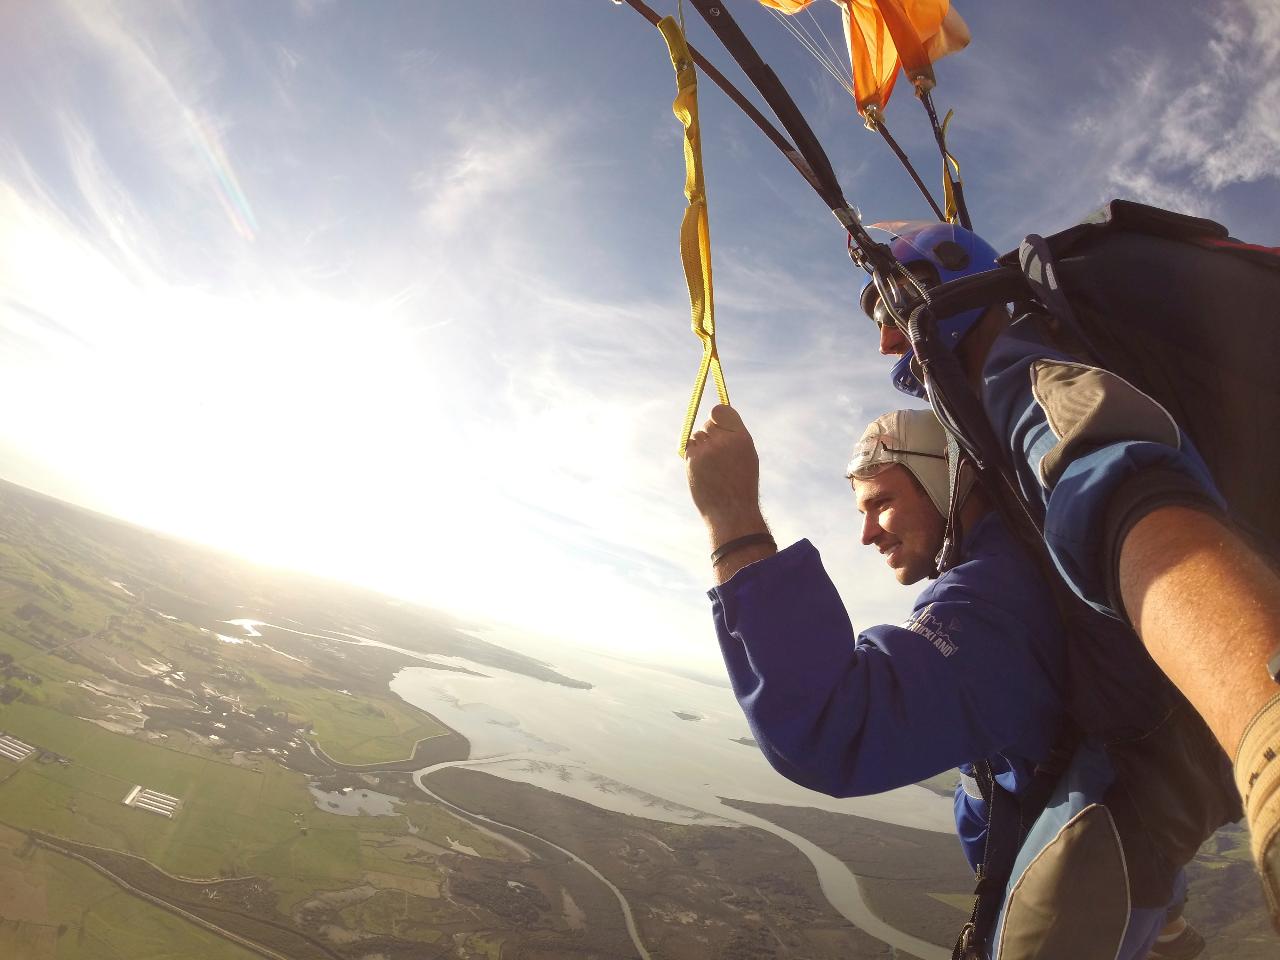 16,000ft Skydive with Photos & Videos Gift Voucher 